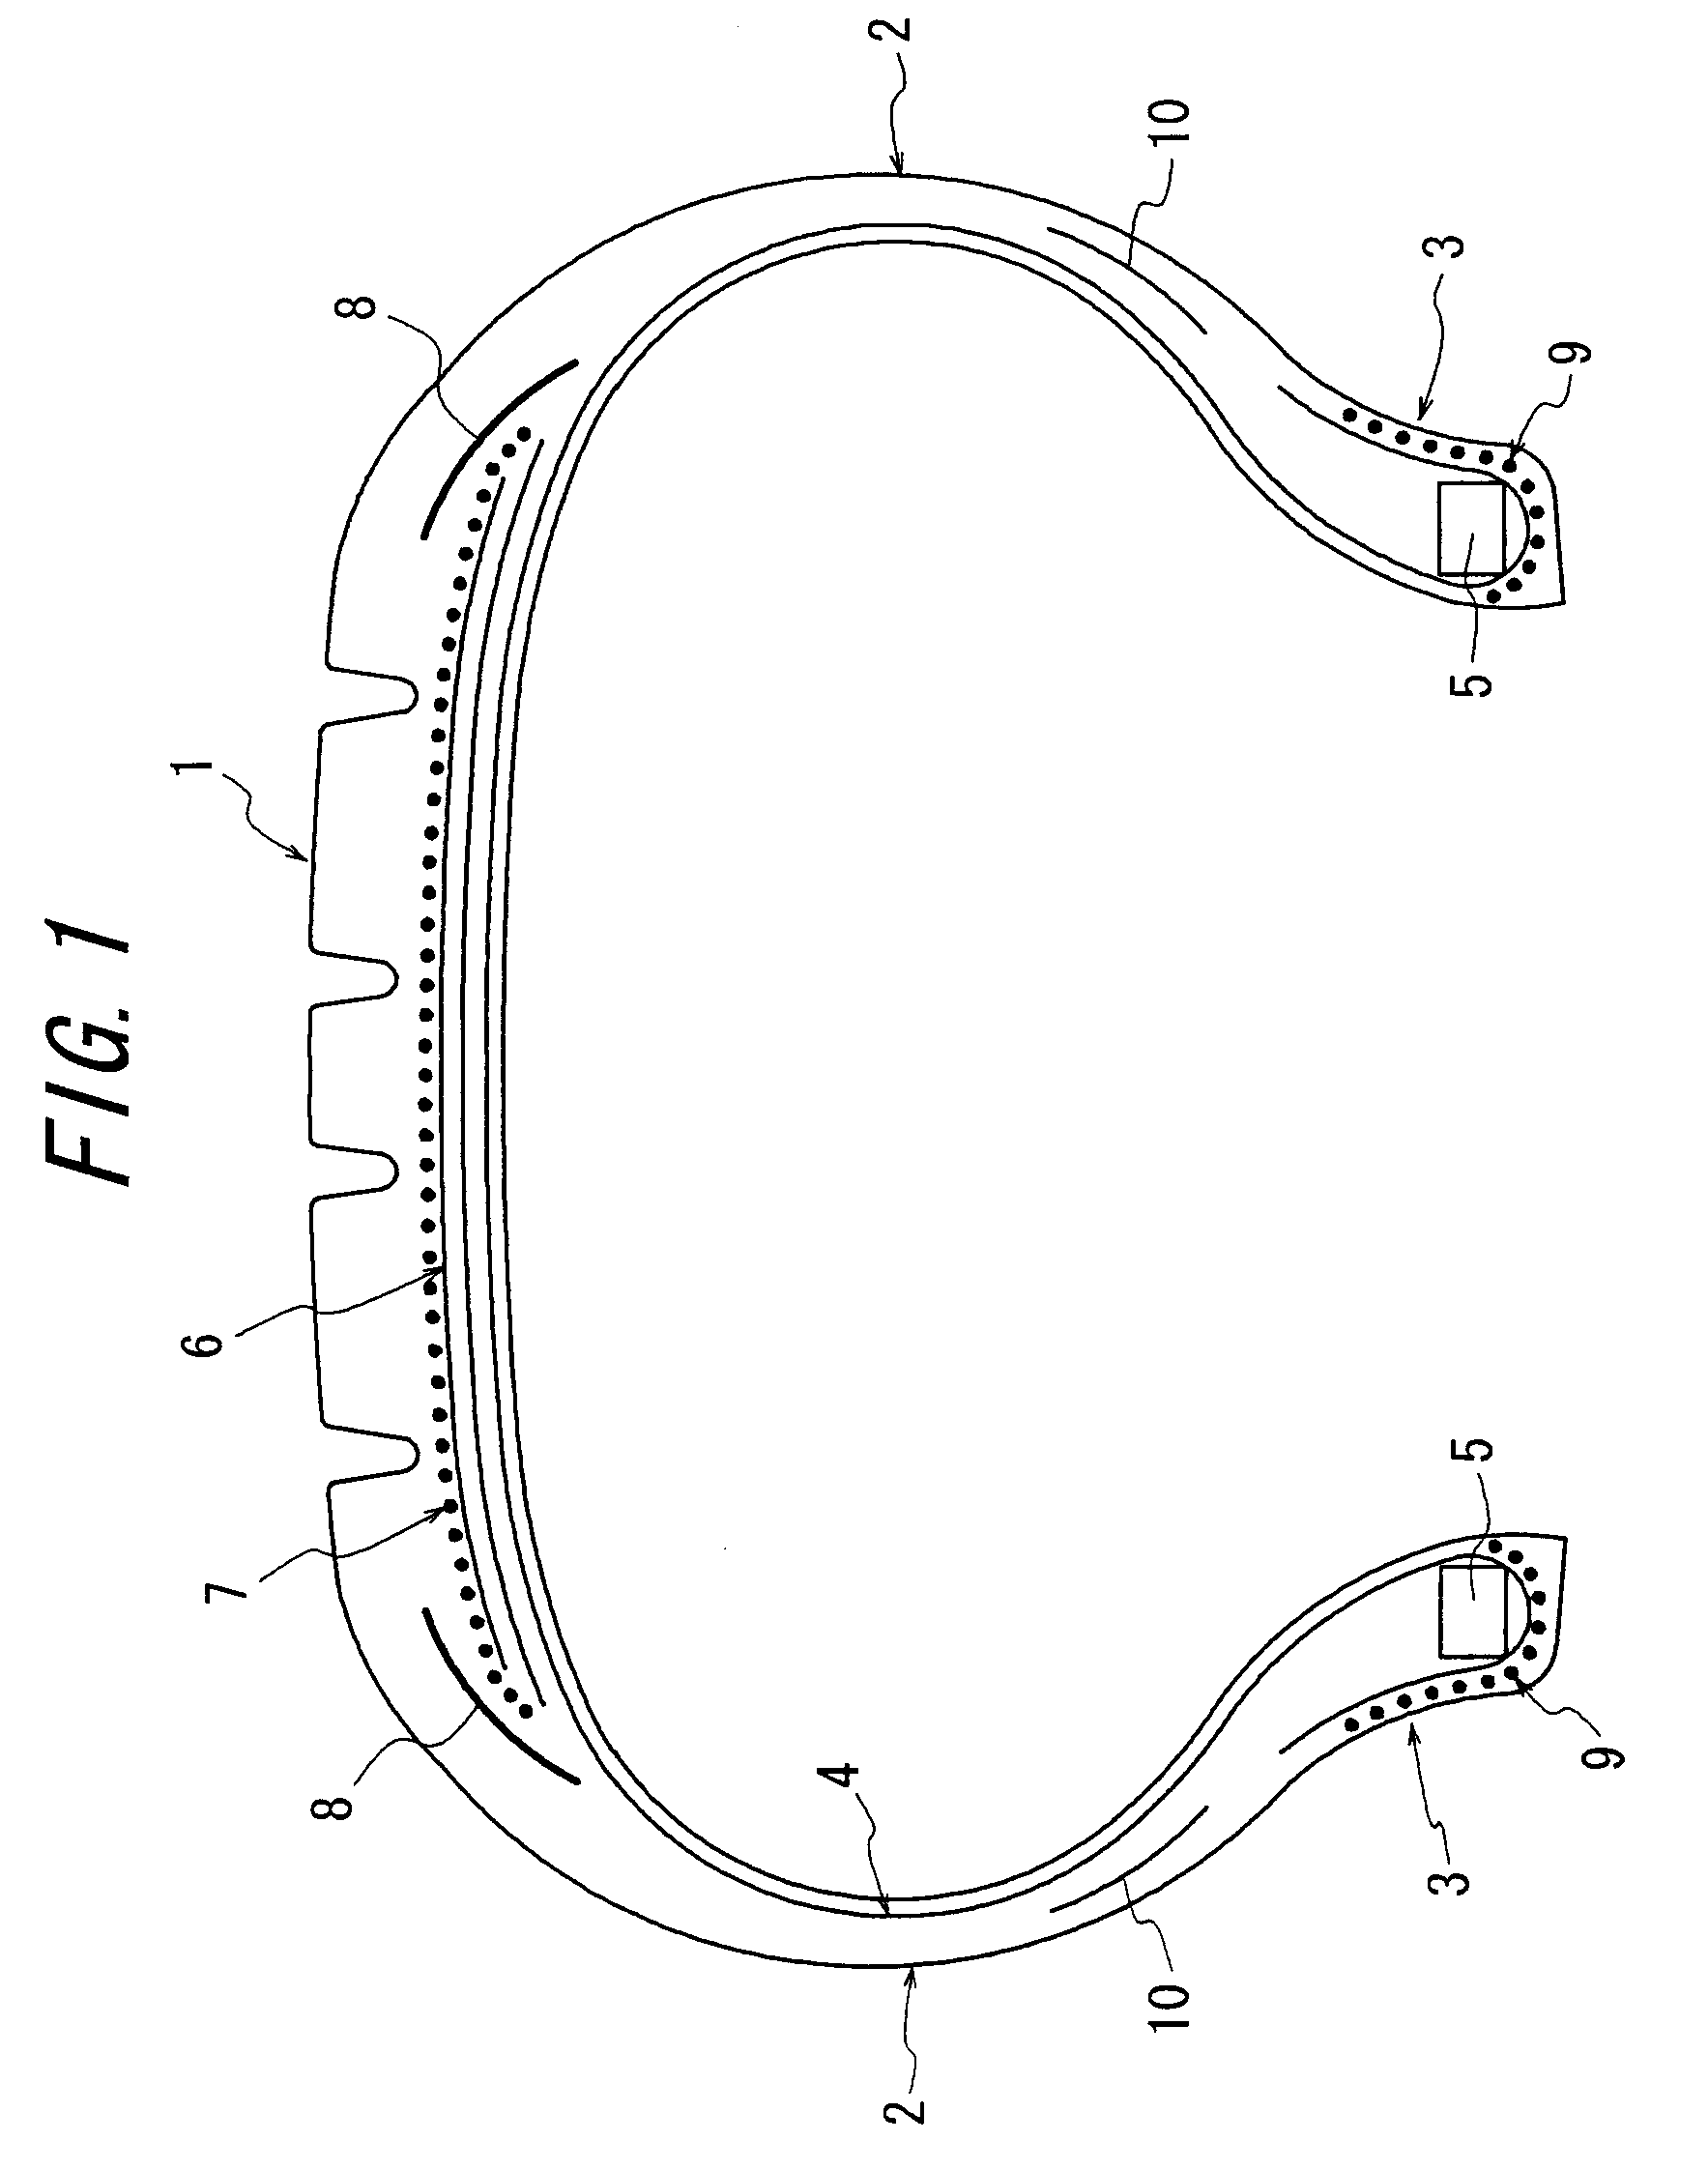 Method for vulcanization-adhering rubber composition to adherent of brass or plated with brass, reinforcing member for rubber article, rubber-reinforcing member composite and pneumatic tire